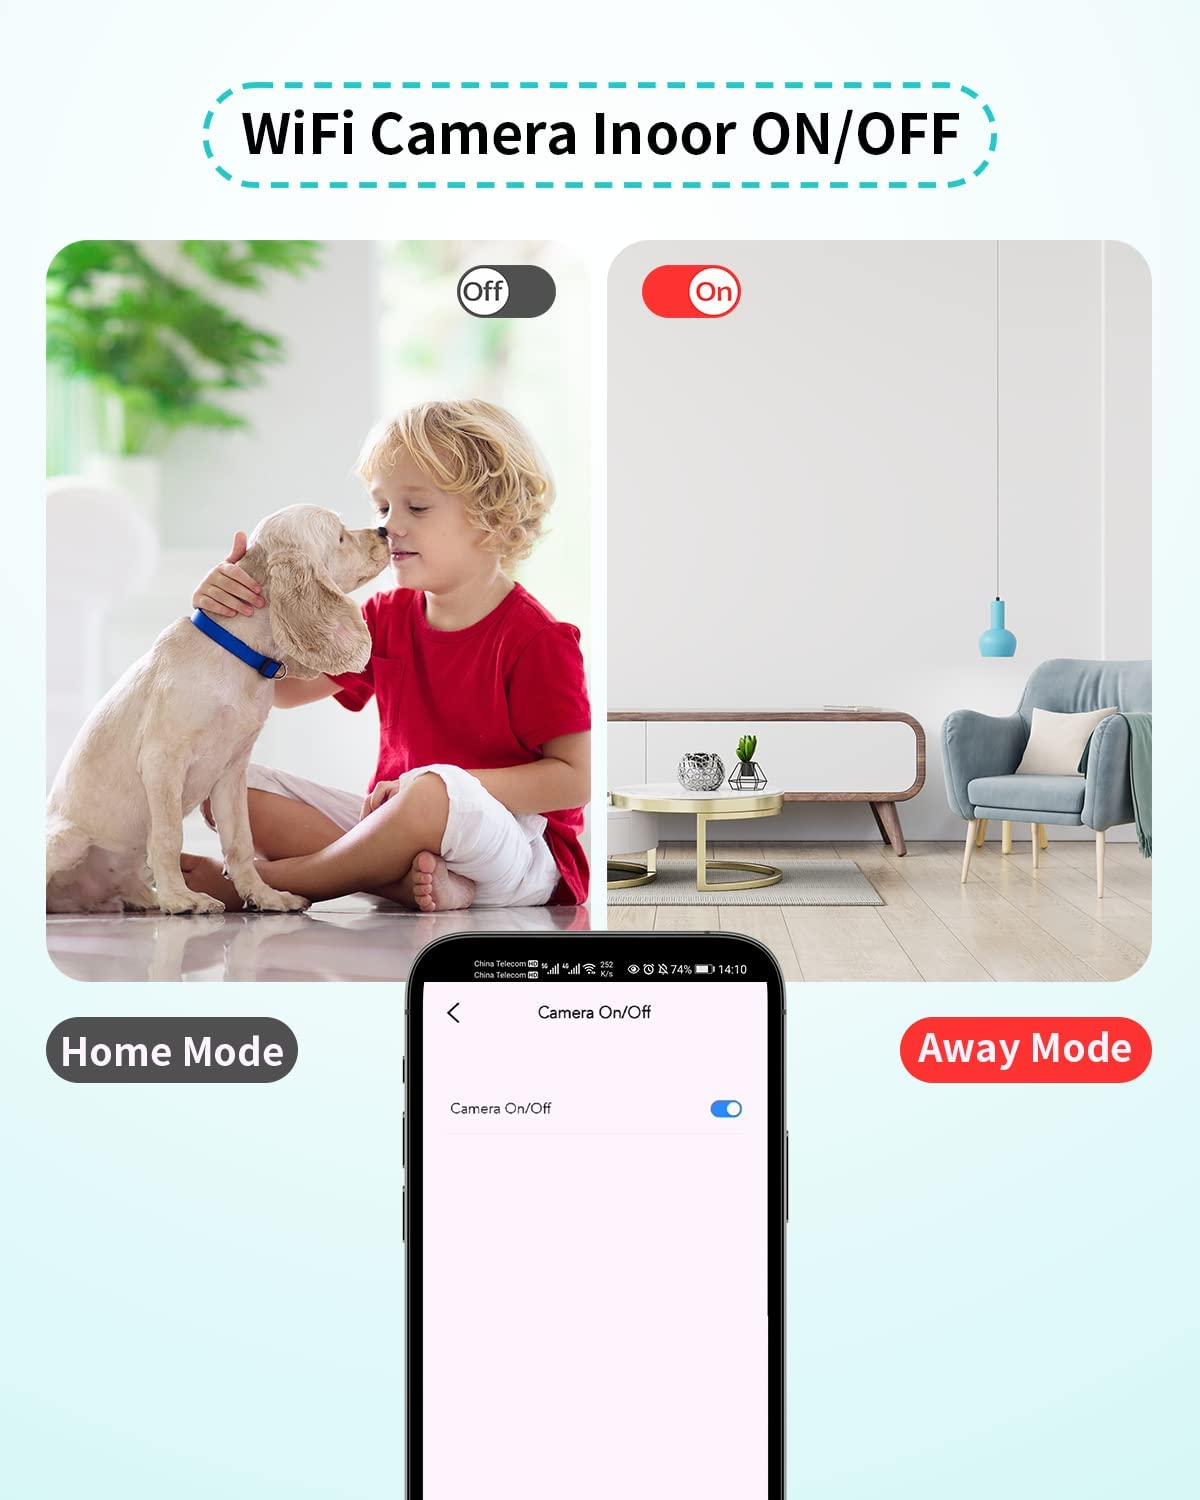 1080P Wifi Camera for Home Security Indoor, Pet Camera with 2-Way Audio, Motion and Sound Detection, Compatible with Alexa and Google Assistant